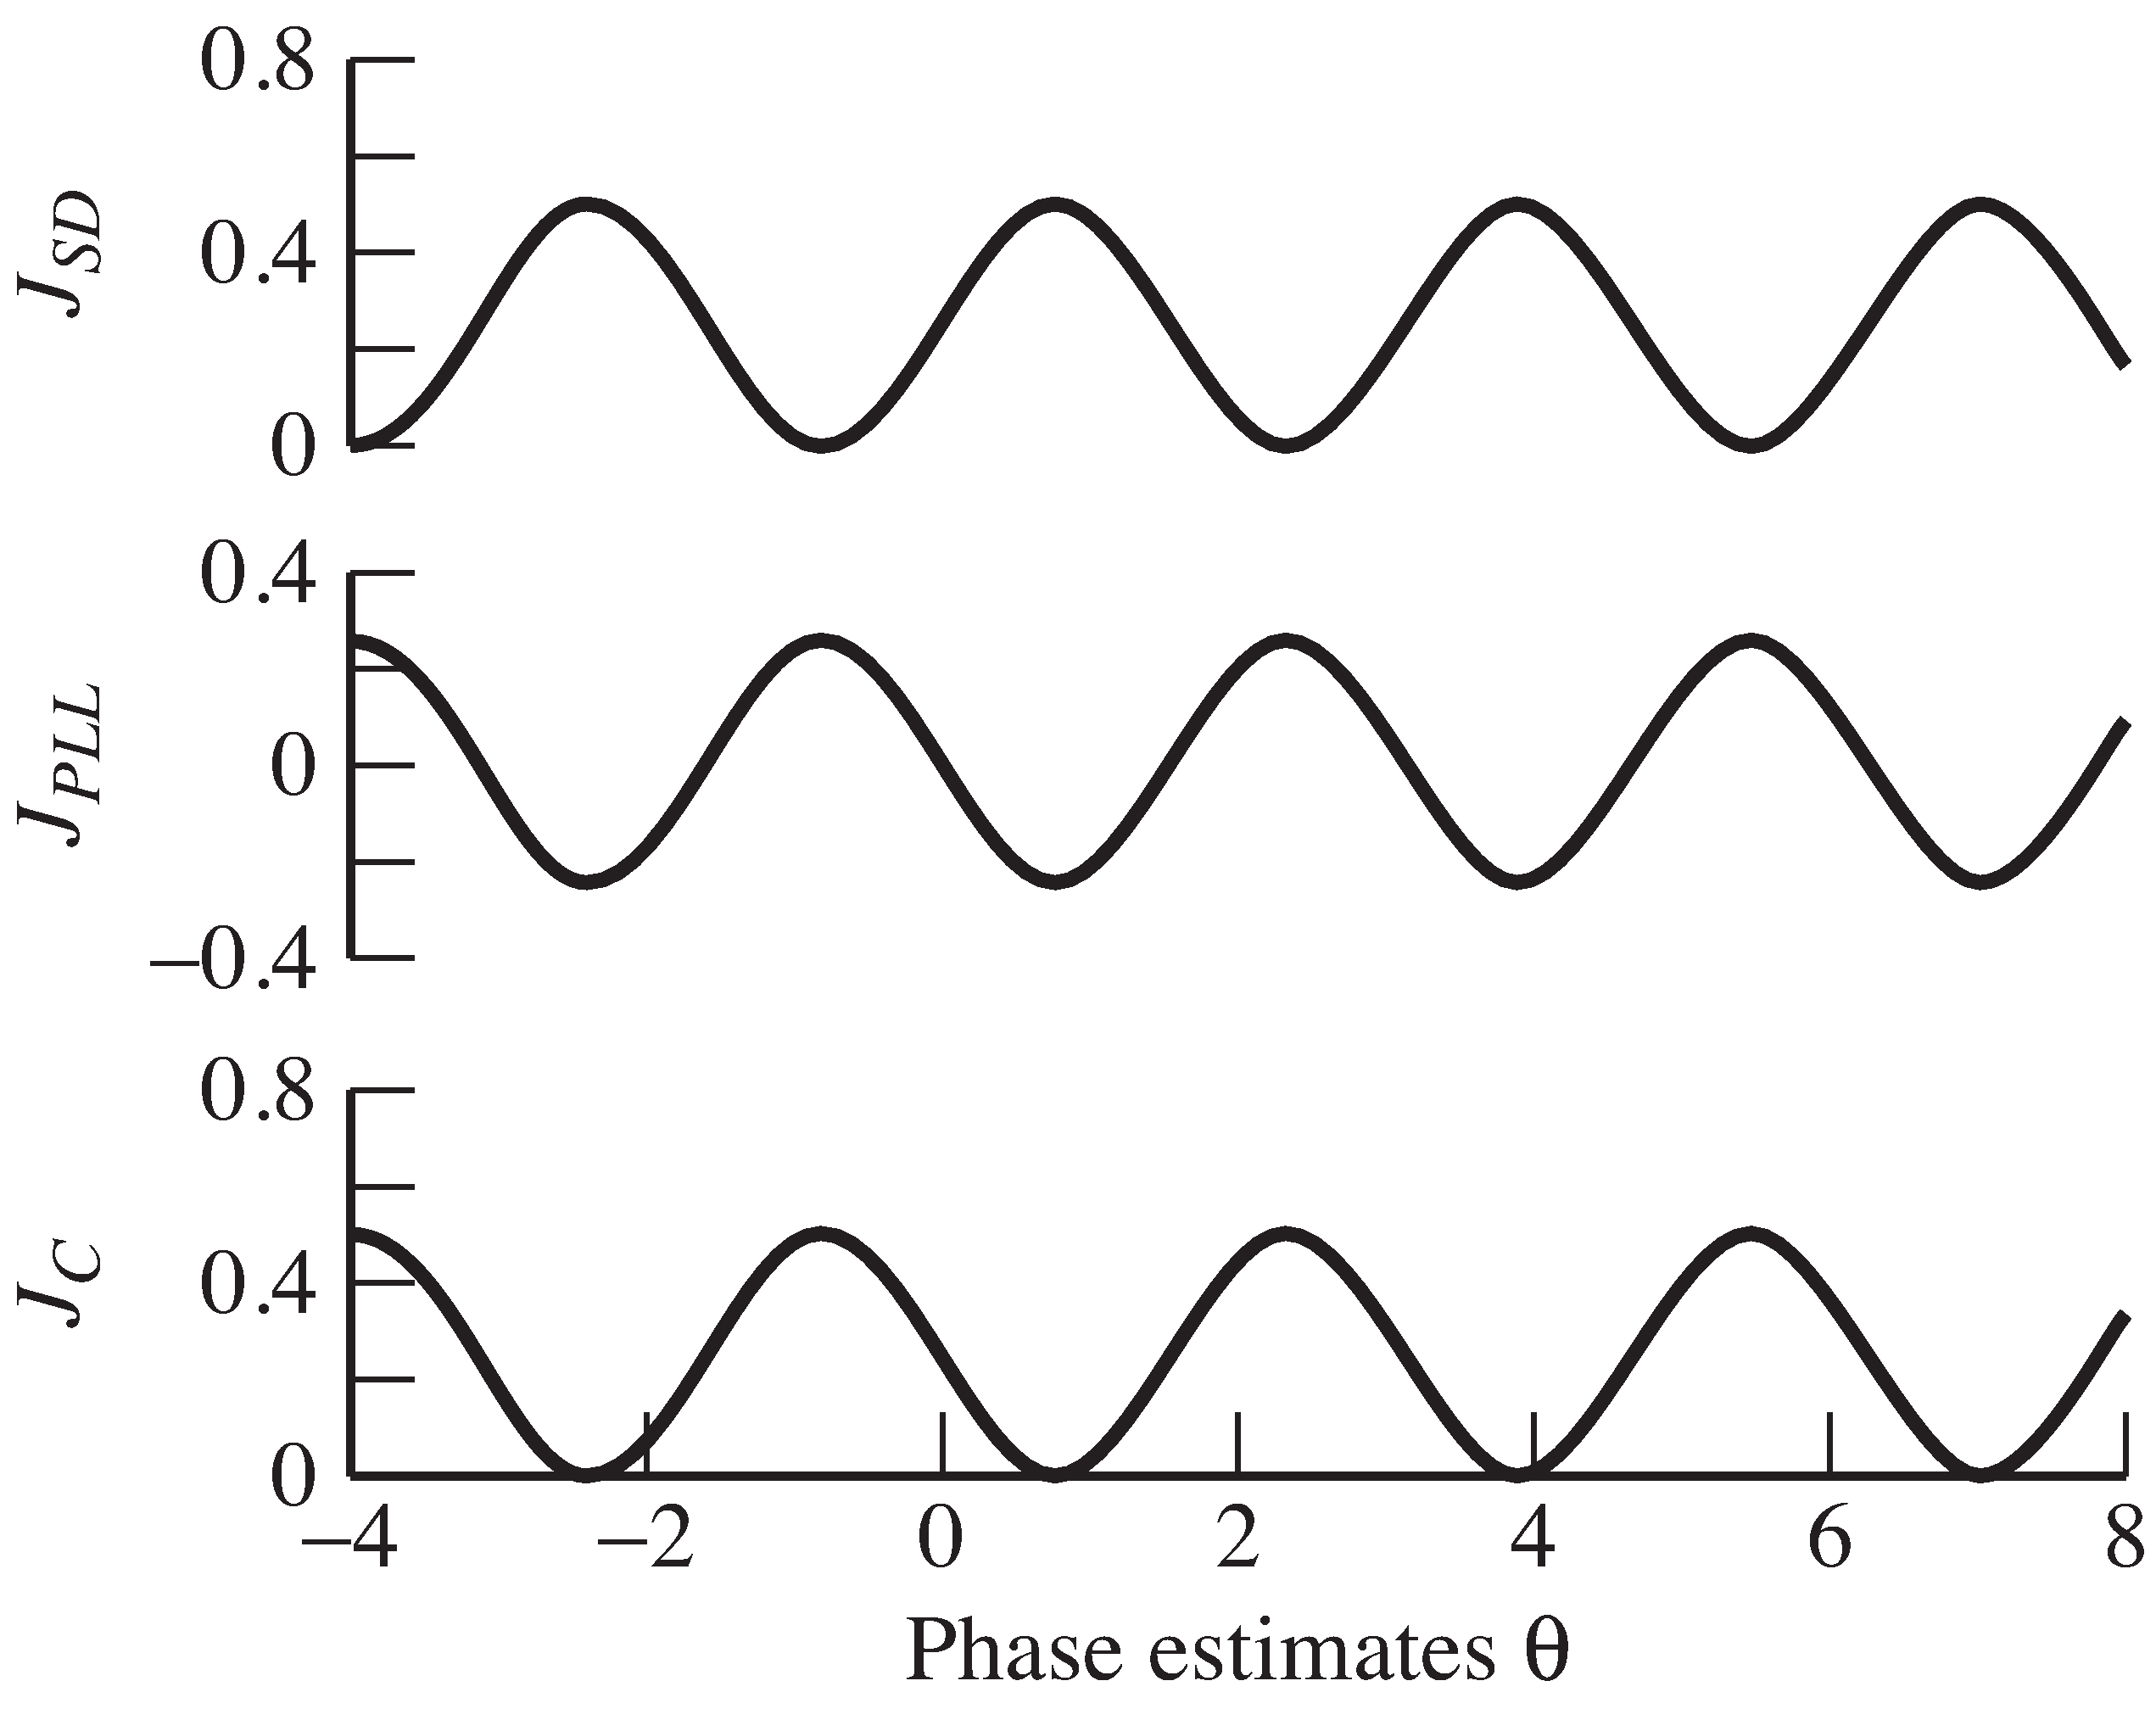 The error surface Equation 17 for the SD phase tracking algorithm is shown in the top plot. Analogous error surfaces for the phase locked loop Equation 22 and the Costas loop Equation 27 are shown in the middle and bottom plots. All have minima (or maxima) at the desired locations (in this case -0.8) plus nπ offsets.